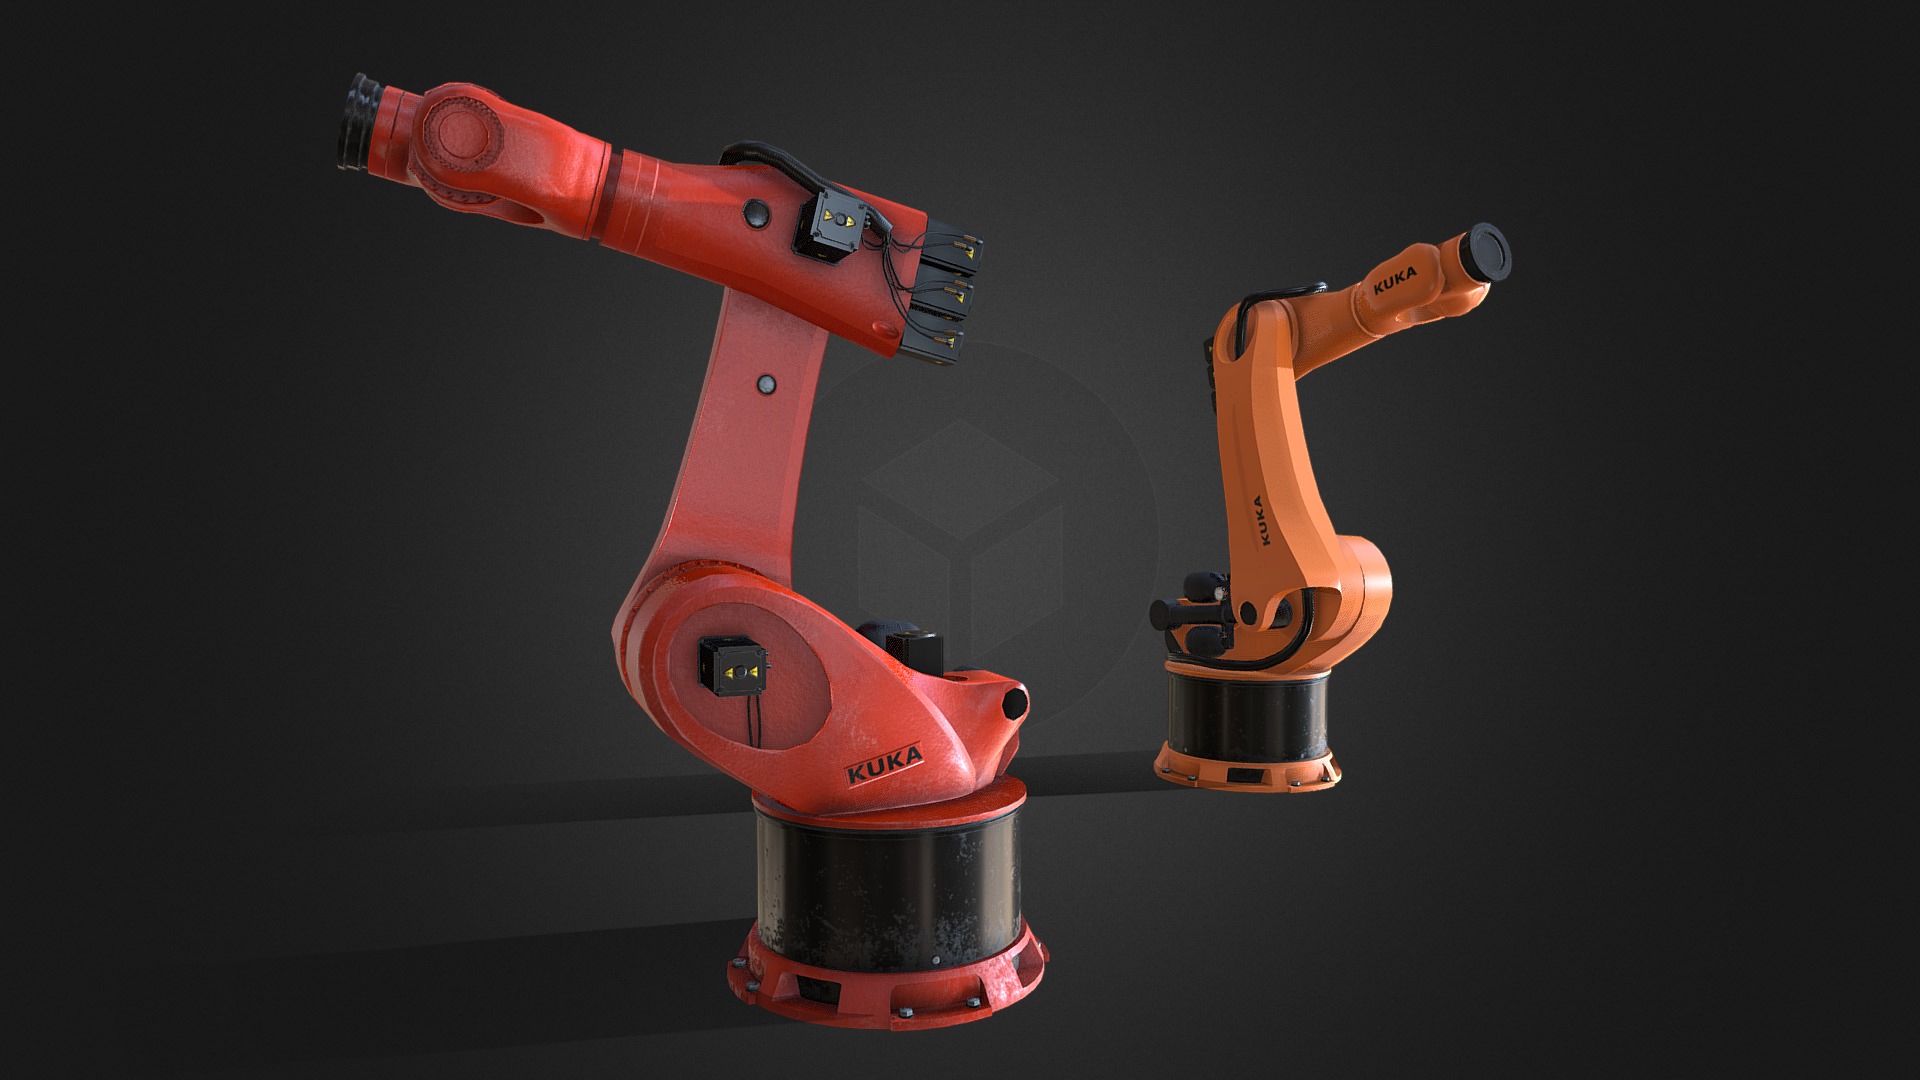 3D model Kuka robot - This is a 3D model of the Kuka robot. The 3D model is about a set of orange and black screws.